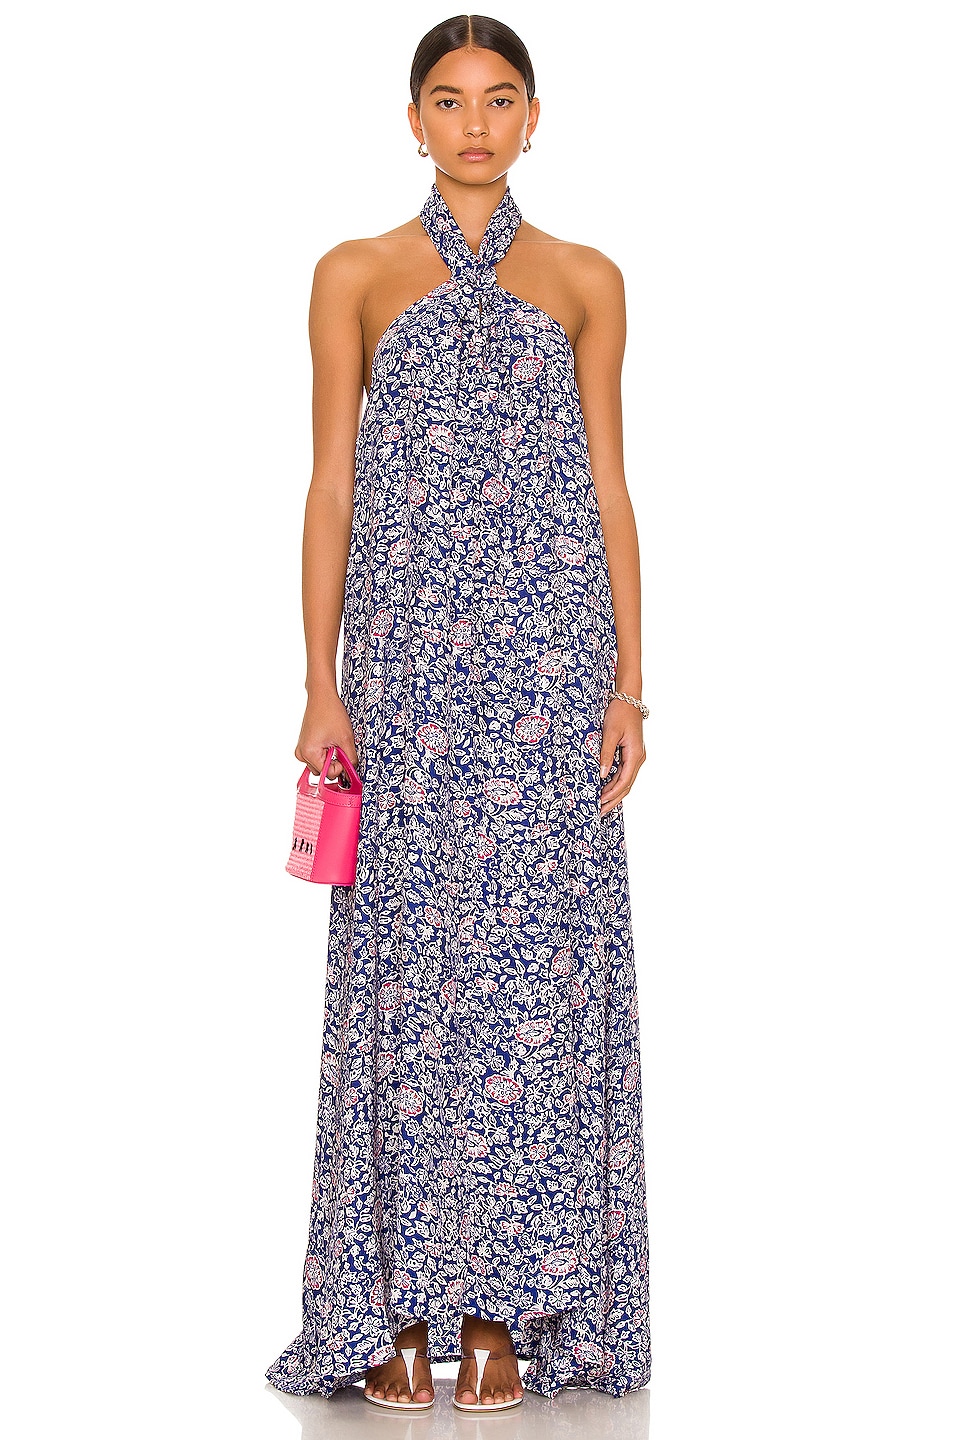 Image 1 of Natalie Martin Astrid Dress in Floral Print Pelicano Blue